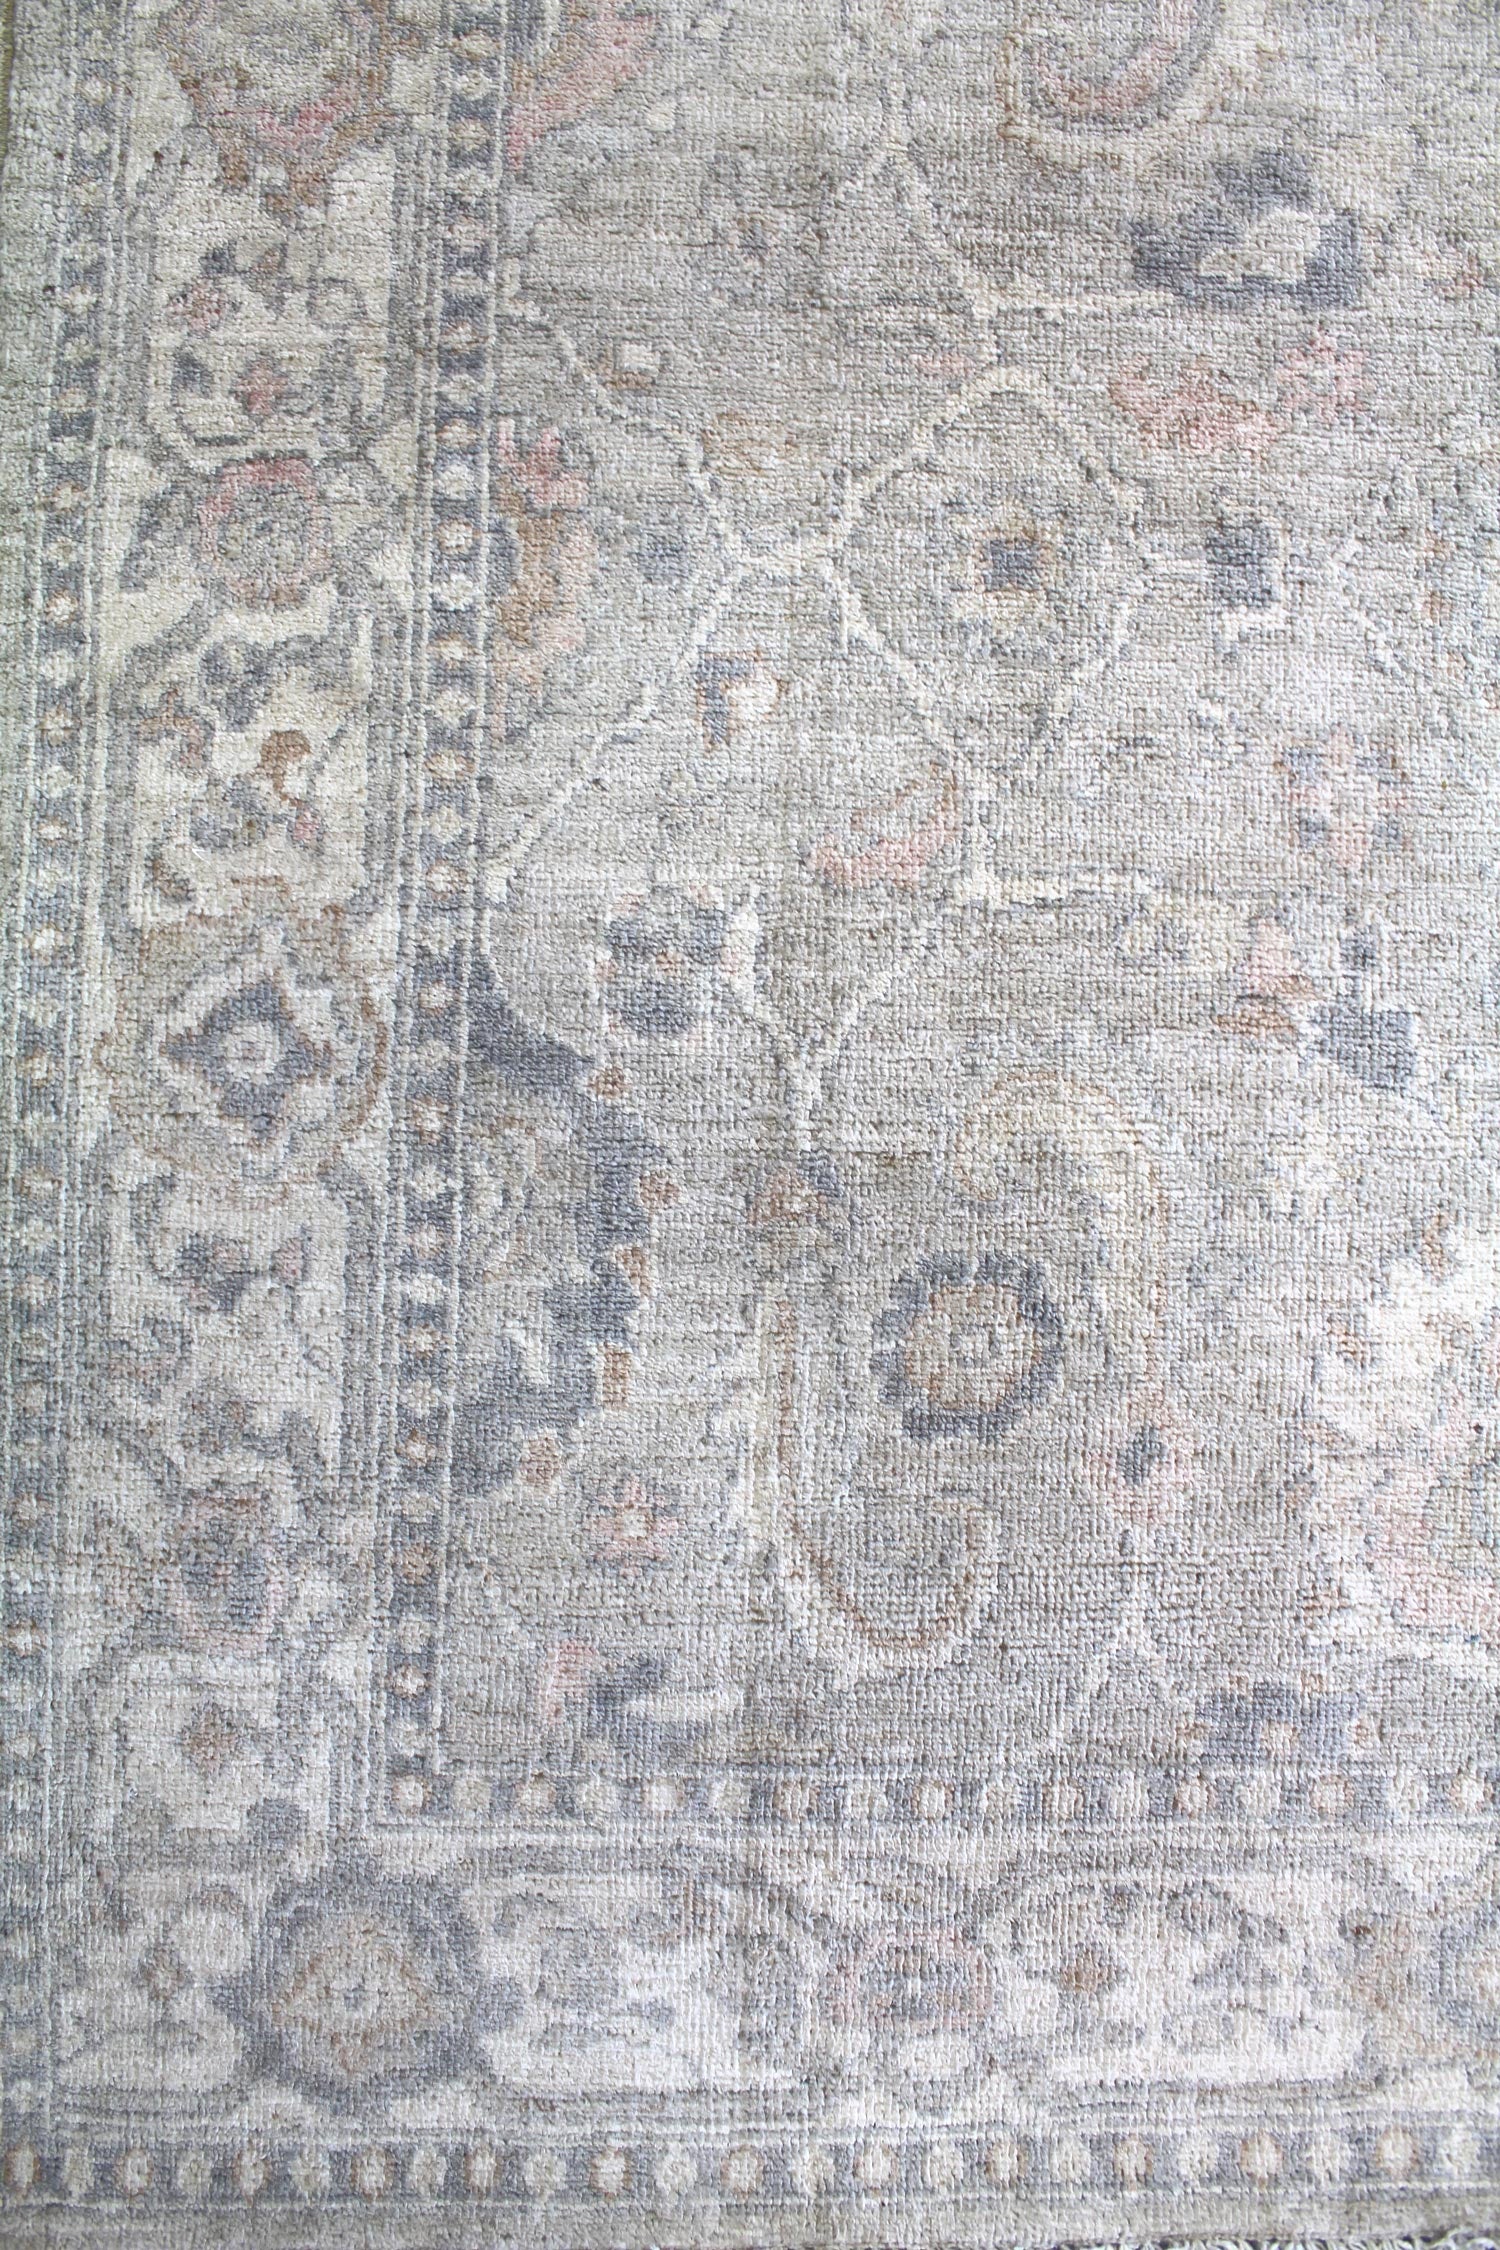 Sultanabad Handwoven Traditional Rug, J57885